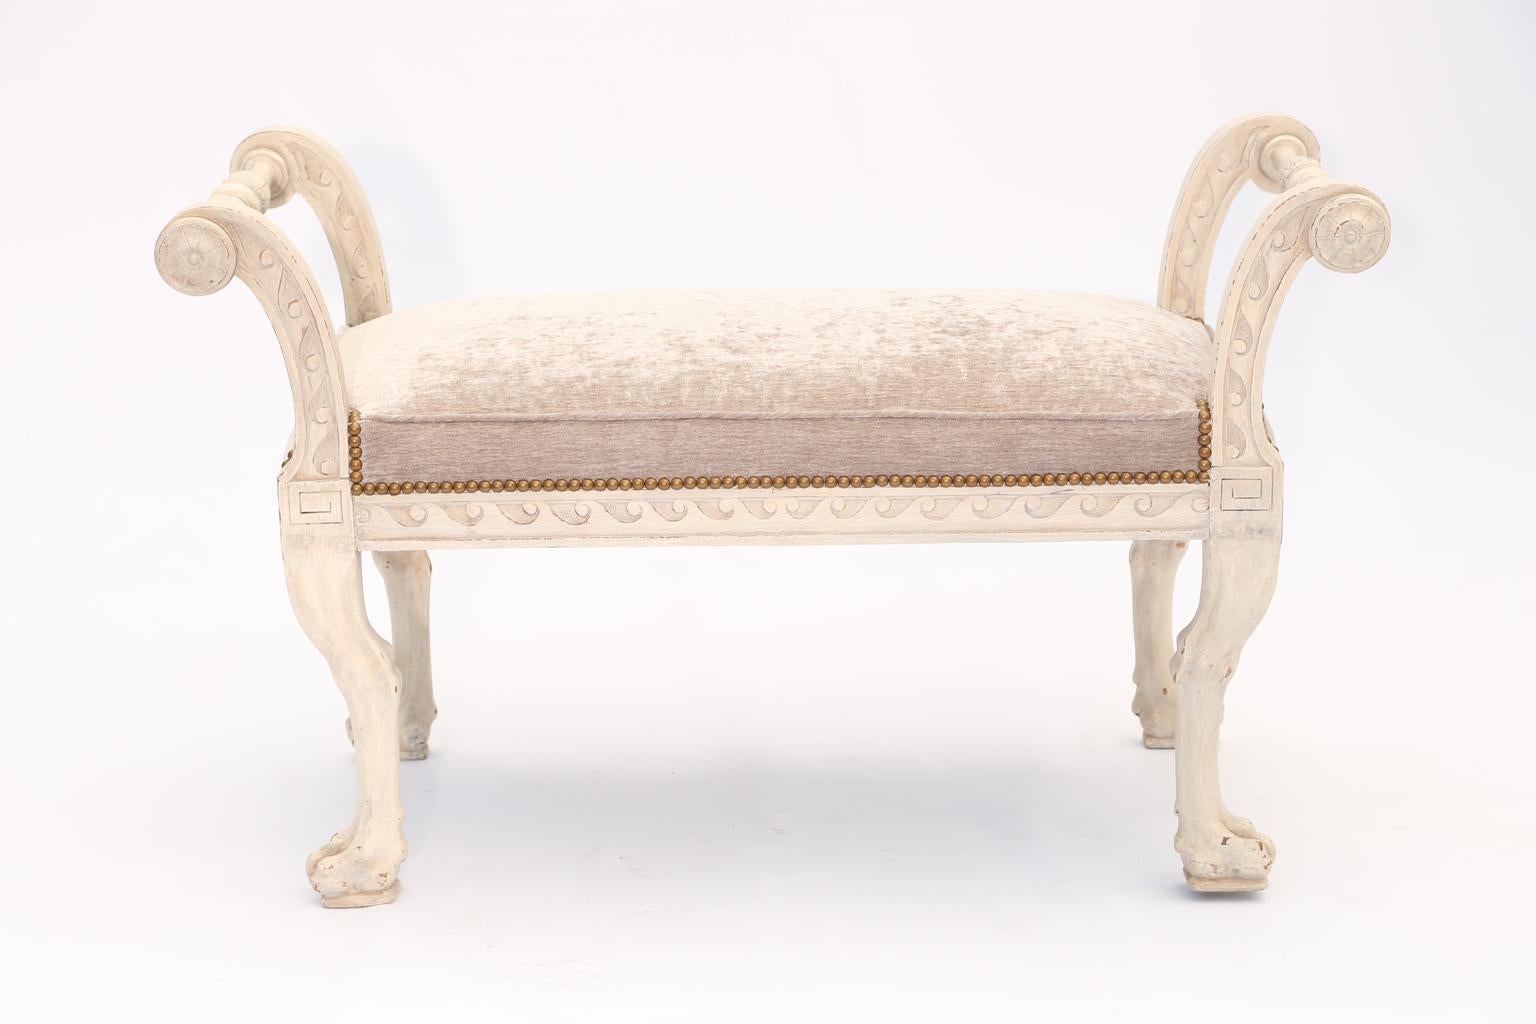 Bench, in Regency style, having a painted finish showing natural wear, its apron carved with evolute scroll, extending to its outswept arms, joined by turned stretcher, decorated with rosettes, flanking a crown seat of velvet, upholstered with